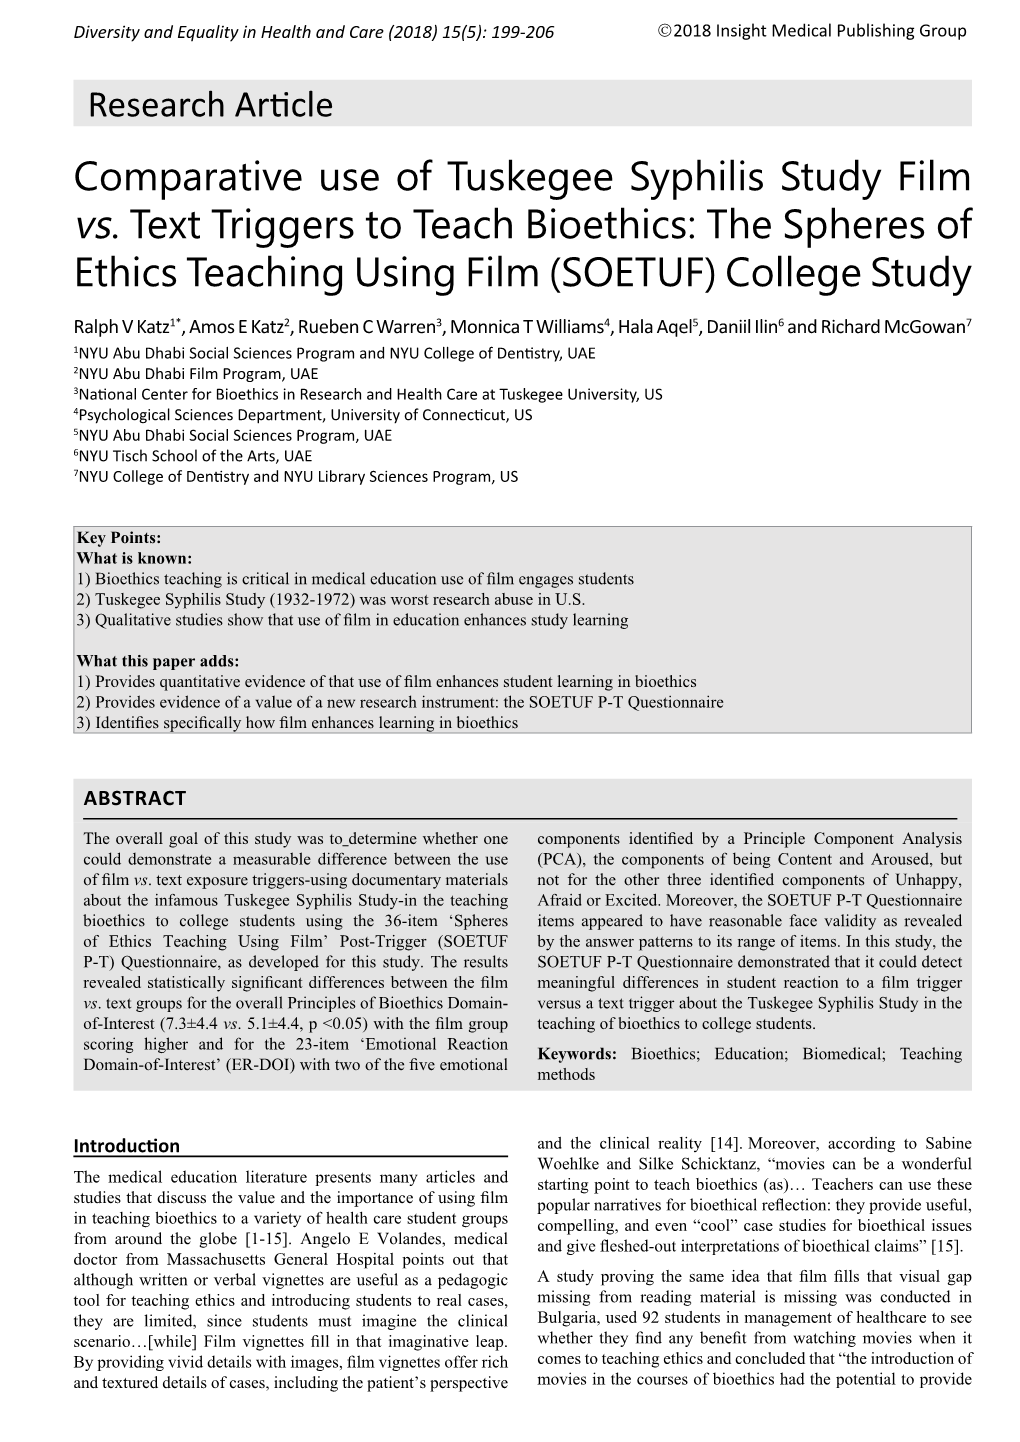 Comparative Use of Tuskegee Syphilis Study Film Vs. Text Triggers to Teach Bioethics: the Spheres of Ethics Teaching Using Film (SOETUF) College Study